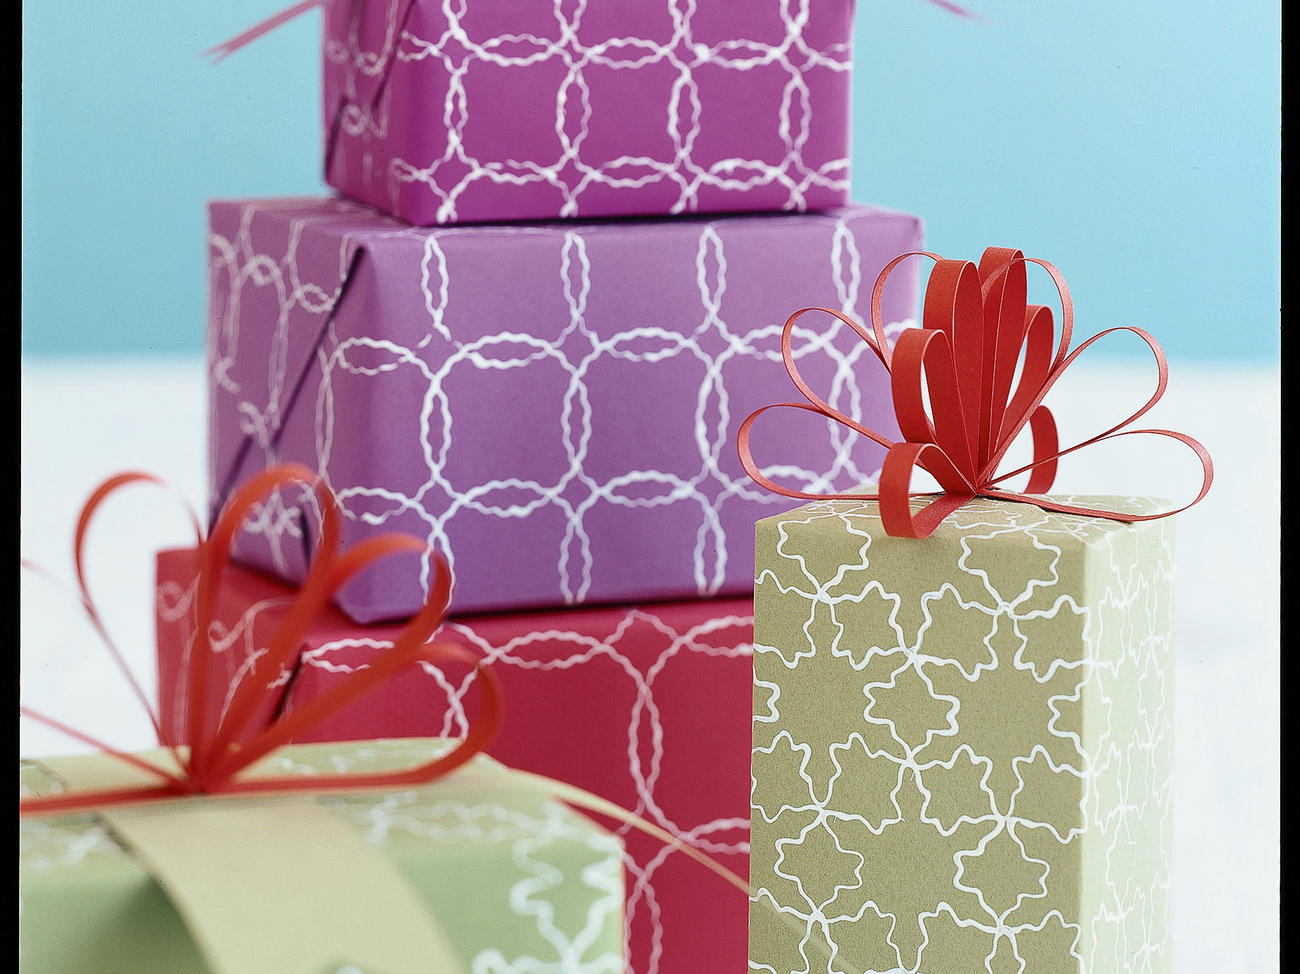 Patterned gift wrap